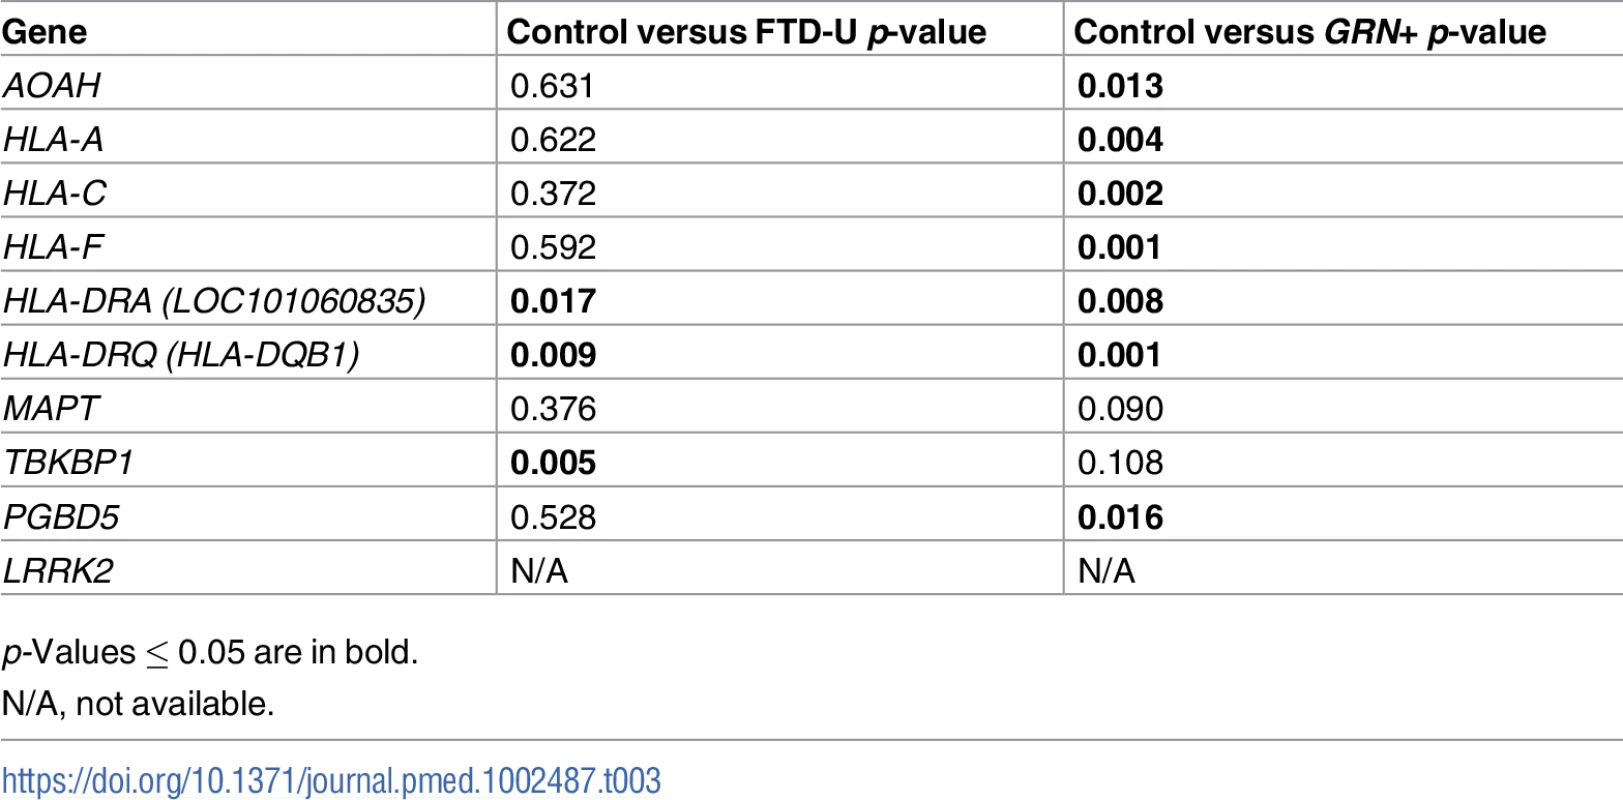 Genes associated with frontotemporal dementia (FTD) and immune-mediated disease differentially altered in patients with frontotemporal lobar degeneration with ubiquitinated inclusions (FTD-U) versus controls.